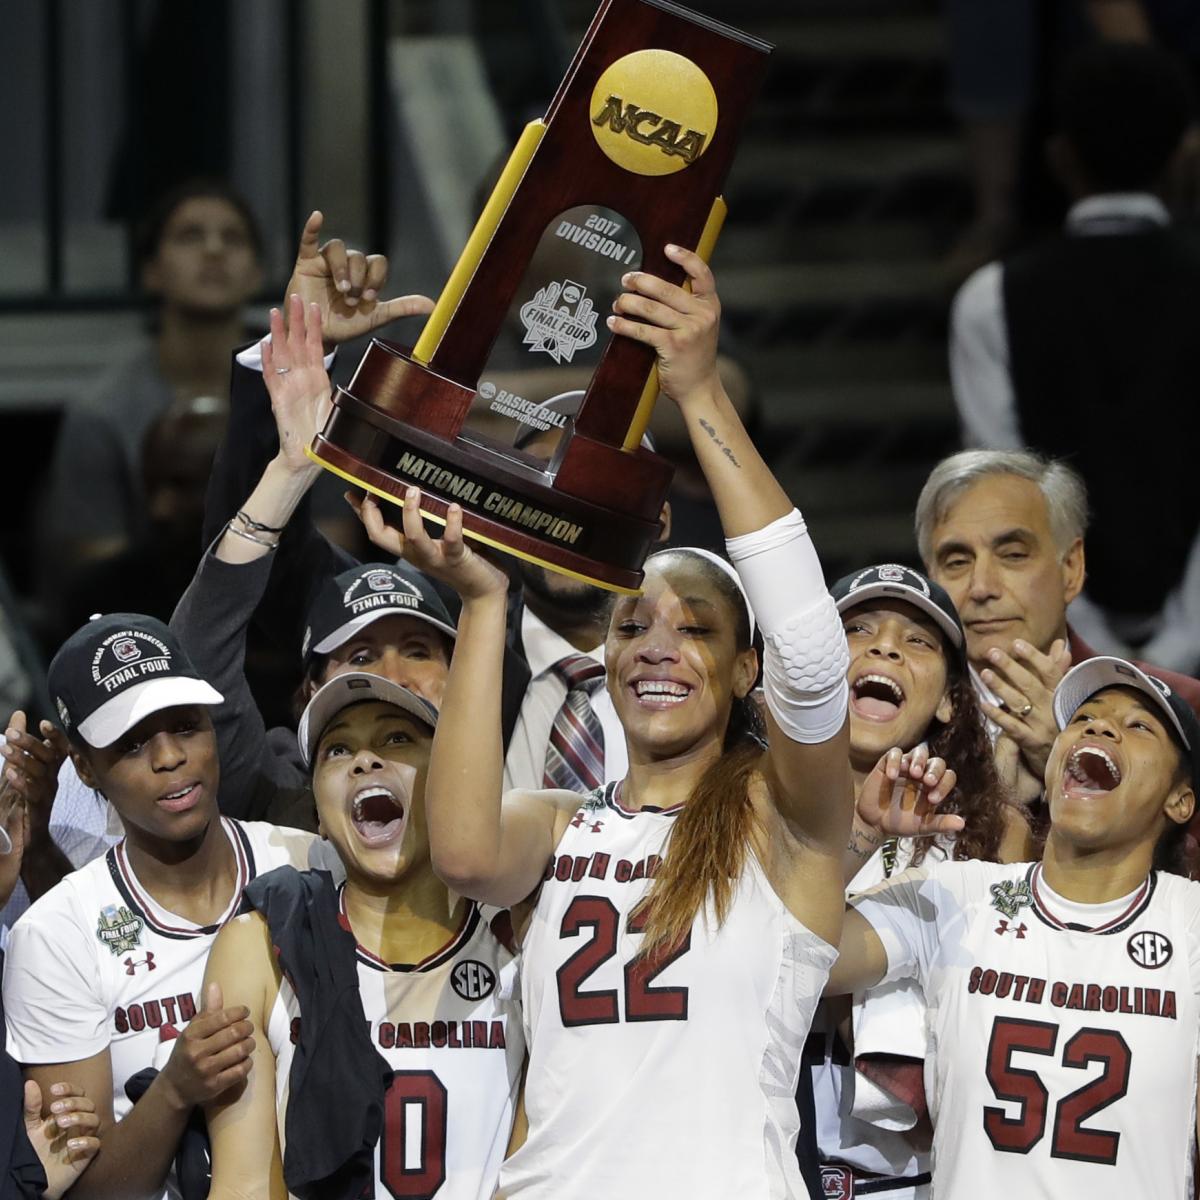 Gamecocks' Dawn Staley lobbies for national title, eager to pursue